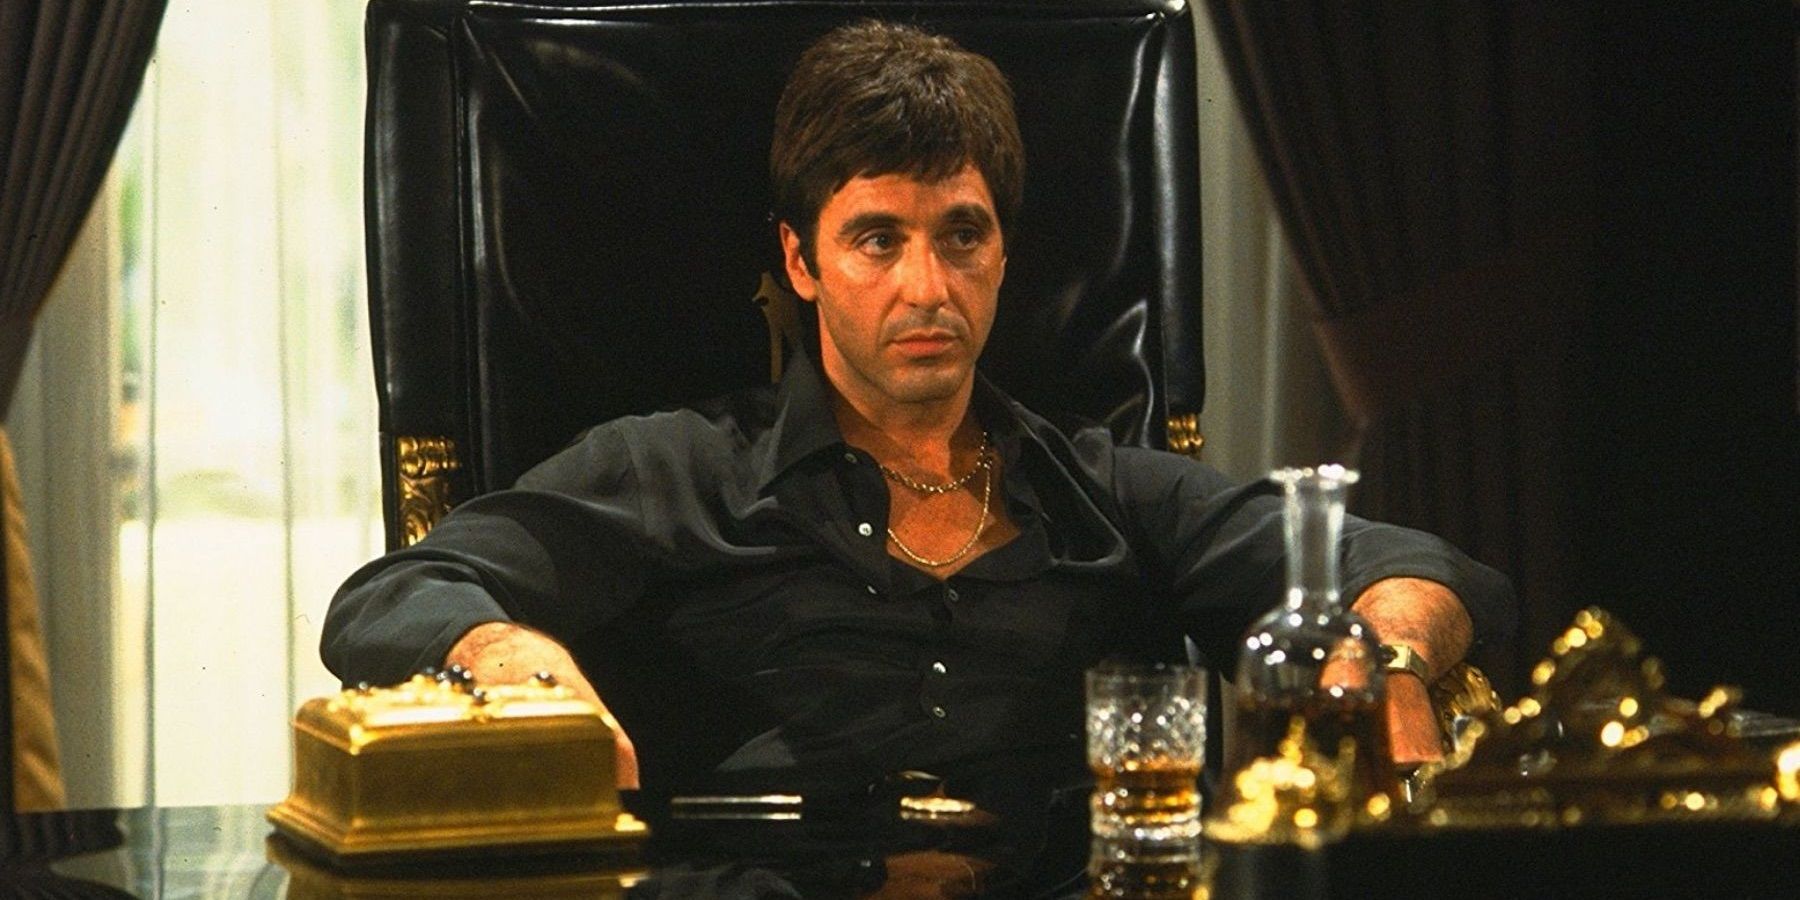 Al Pacino as Tony Montana sitting behind his desk in Scarface